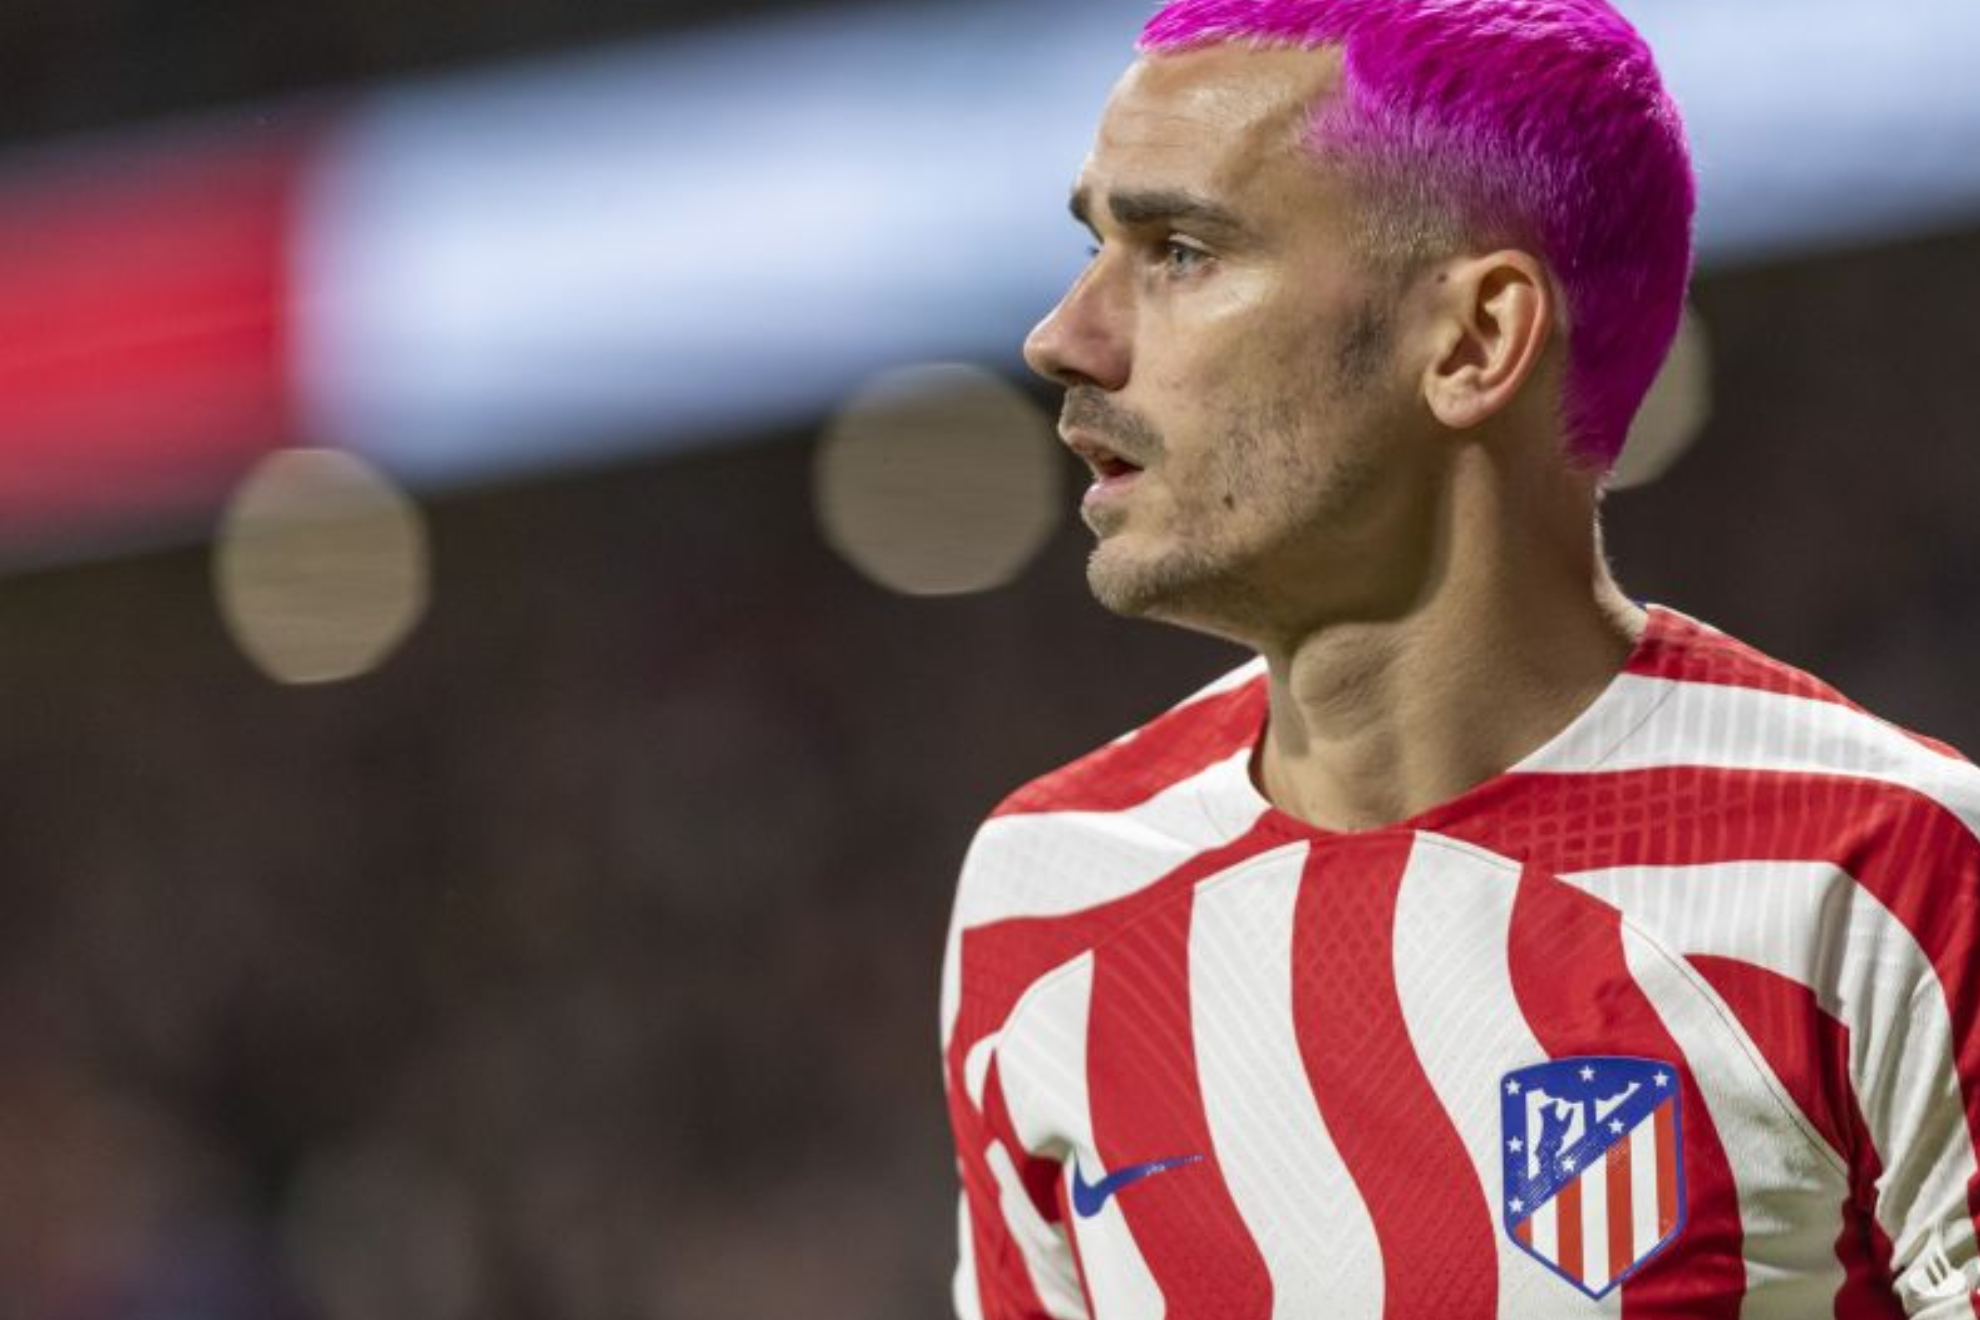 Antoine Griezmann shows off daring new haircut before missing absolute  sitter in Barcelonas clash against Real Sociedad  The Sun